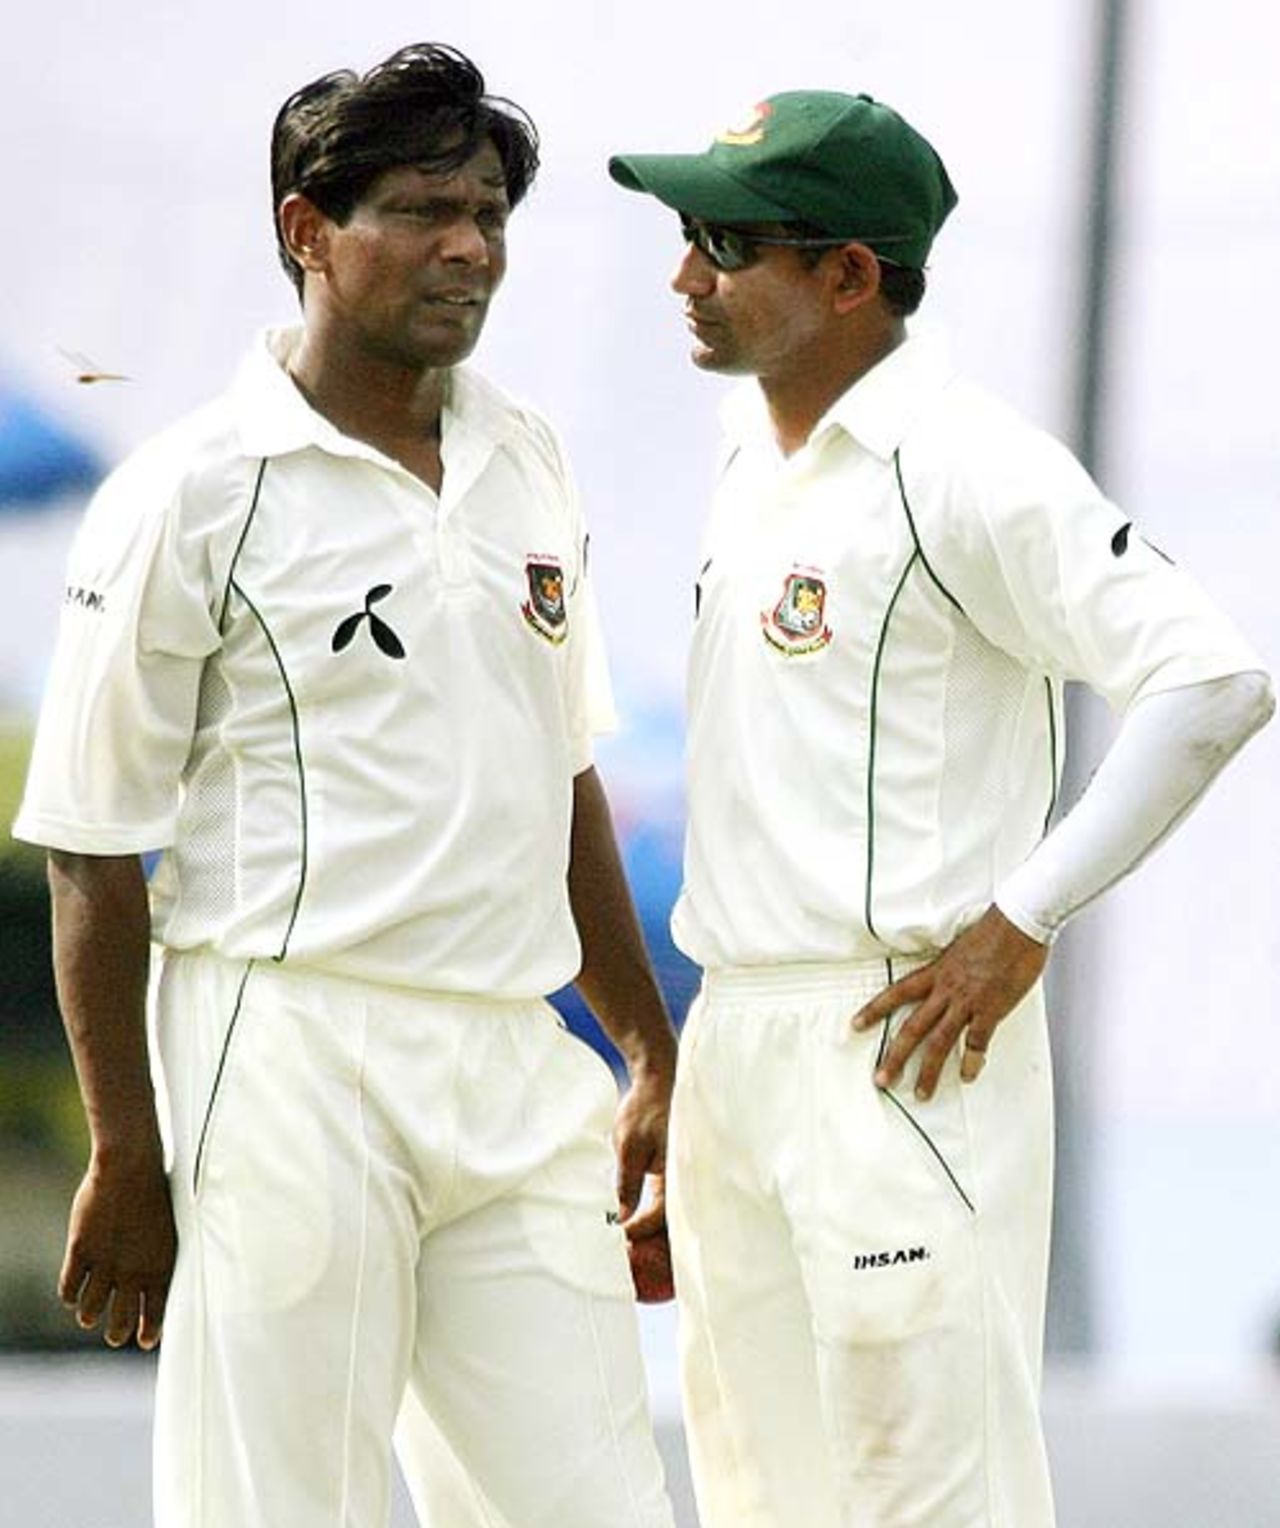 Habibul Bashar discusses strategy with team mate Mohammad Rafique, Bangladesh v India, 2nd Test, Mirpur, 1st day, May 25, 2007